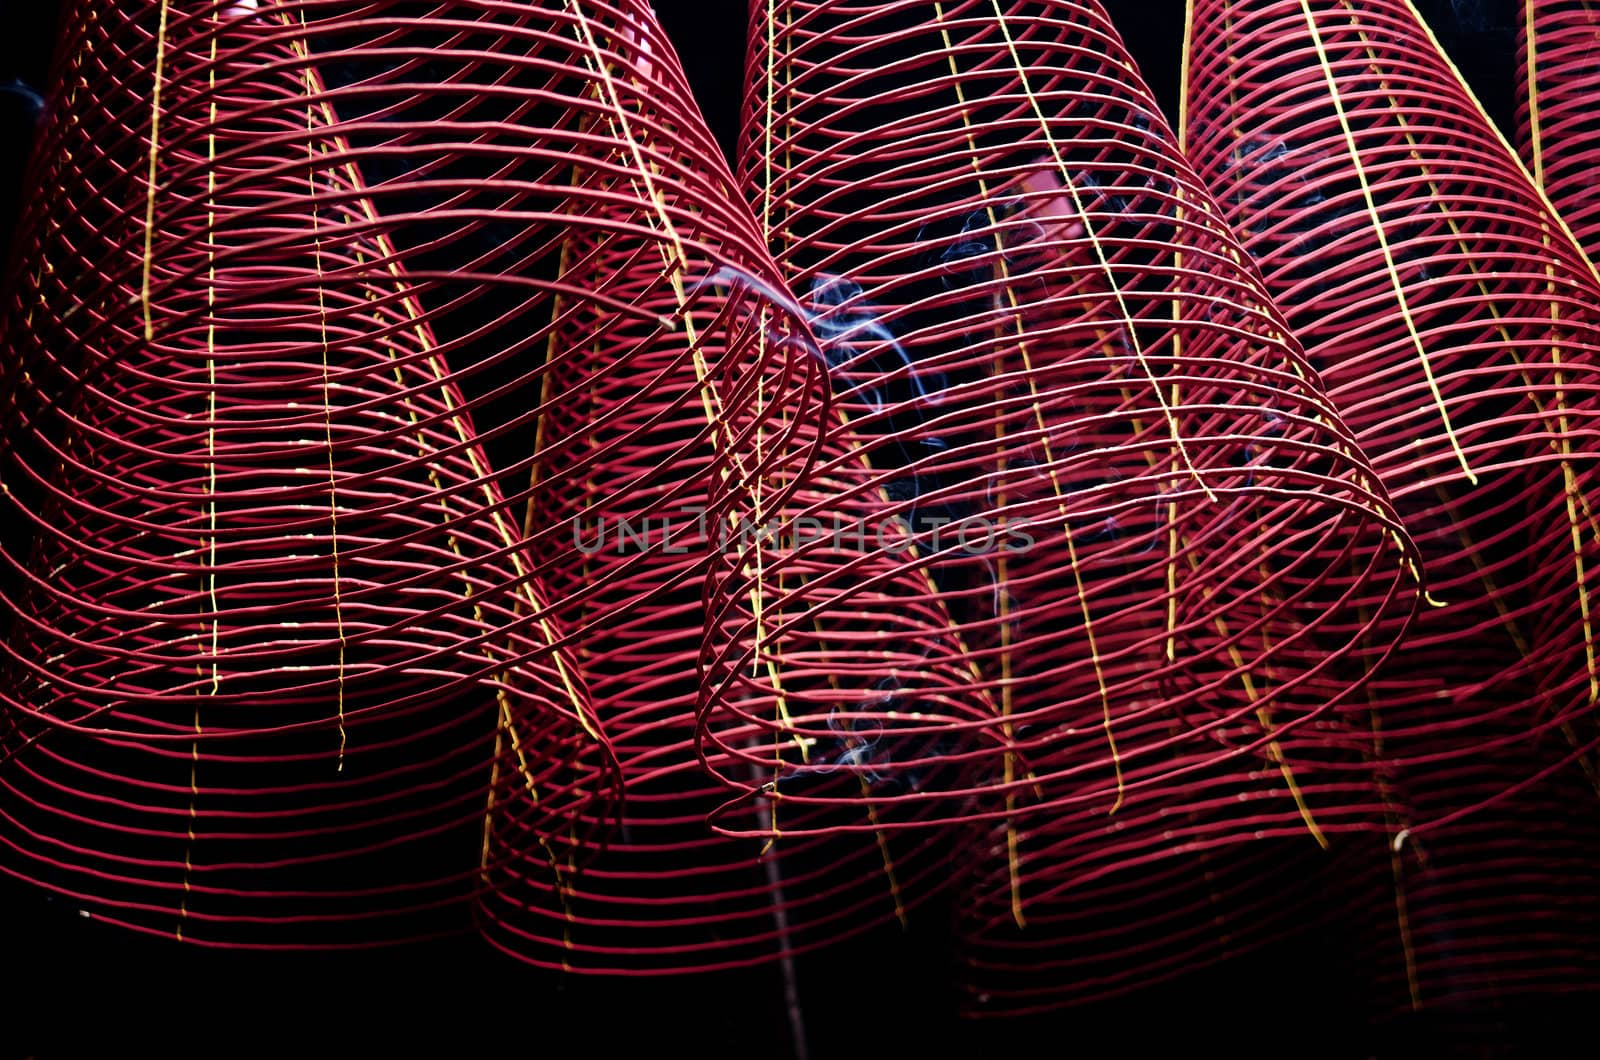 incense coils in chinese temple ho chi minh saigon vietnam by jackmalipan